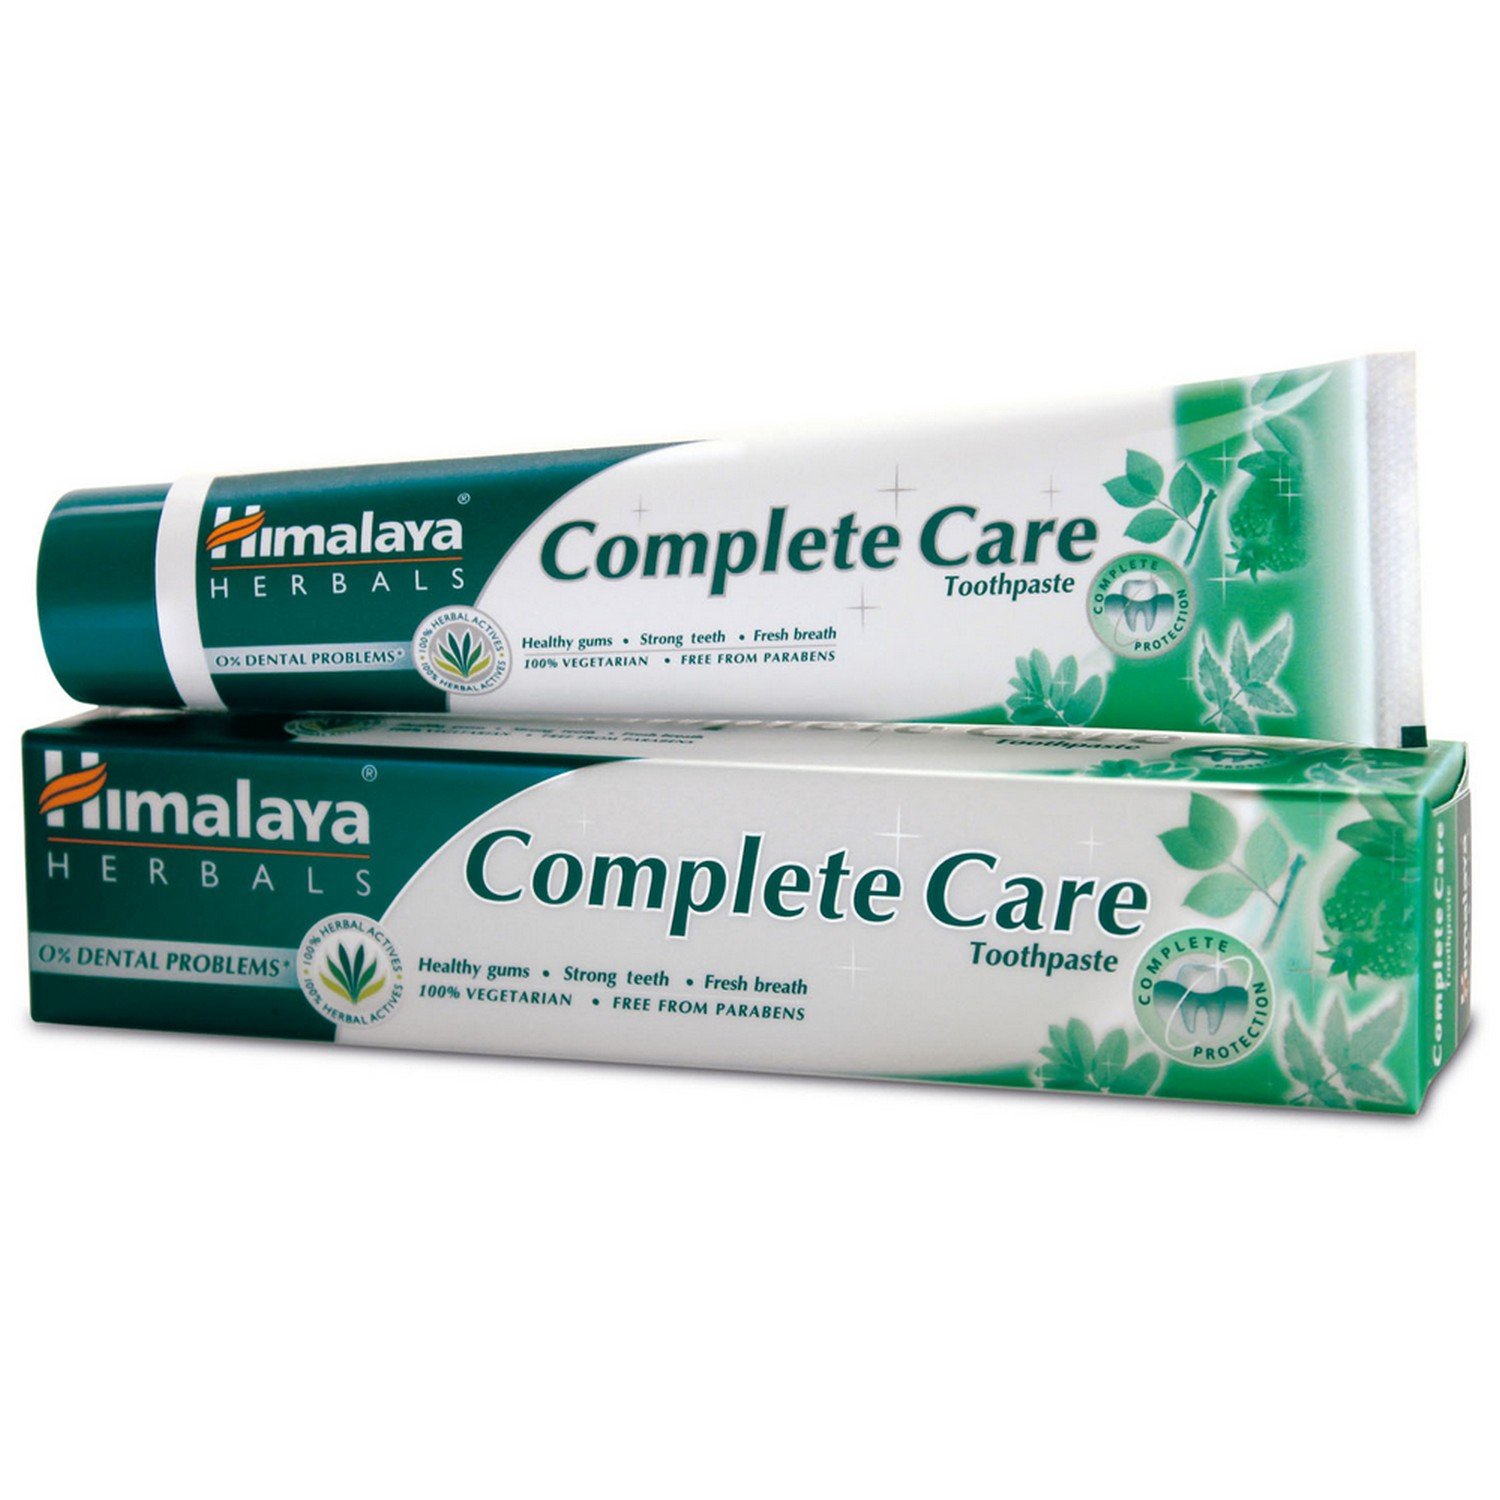 Himalaya Herbal complete care toothpaste